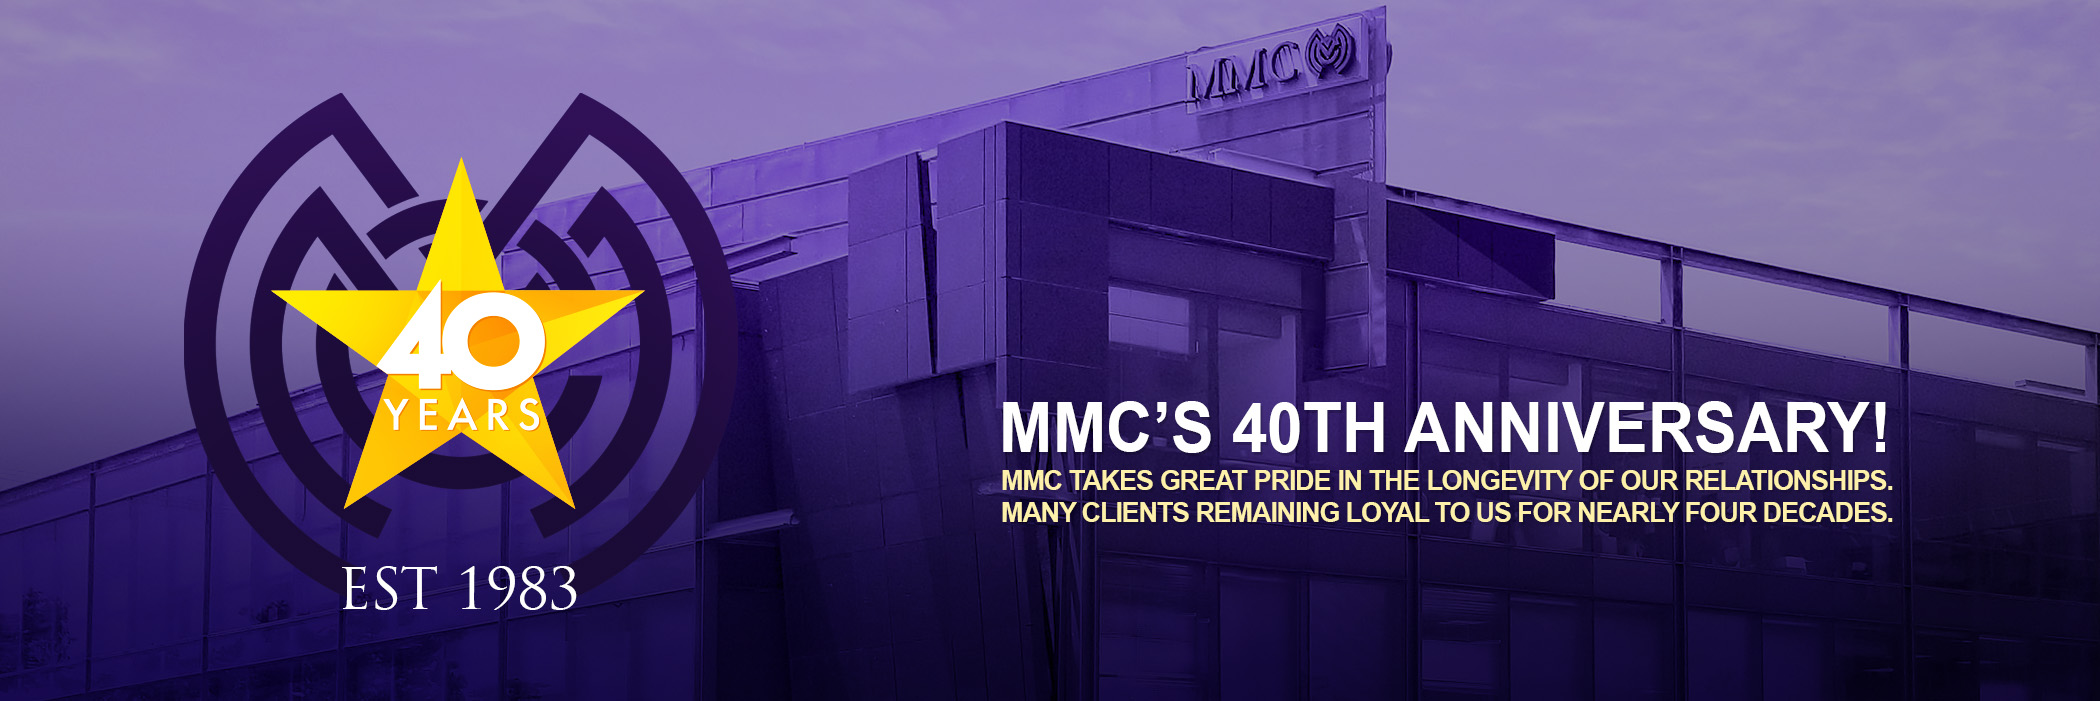 A banner photo of MMC HR's building with their logo celebrating 40 years of business. The text on the banner reads "MMC's 40th Anniversary! MMC takes great pride i the longevity of our relationships. Many clients remaining loyal to us for nearly four decades.